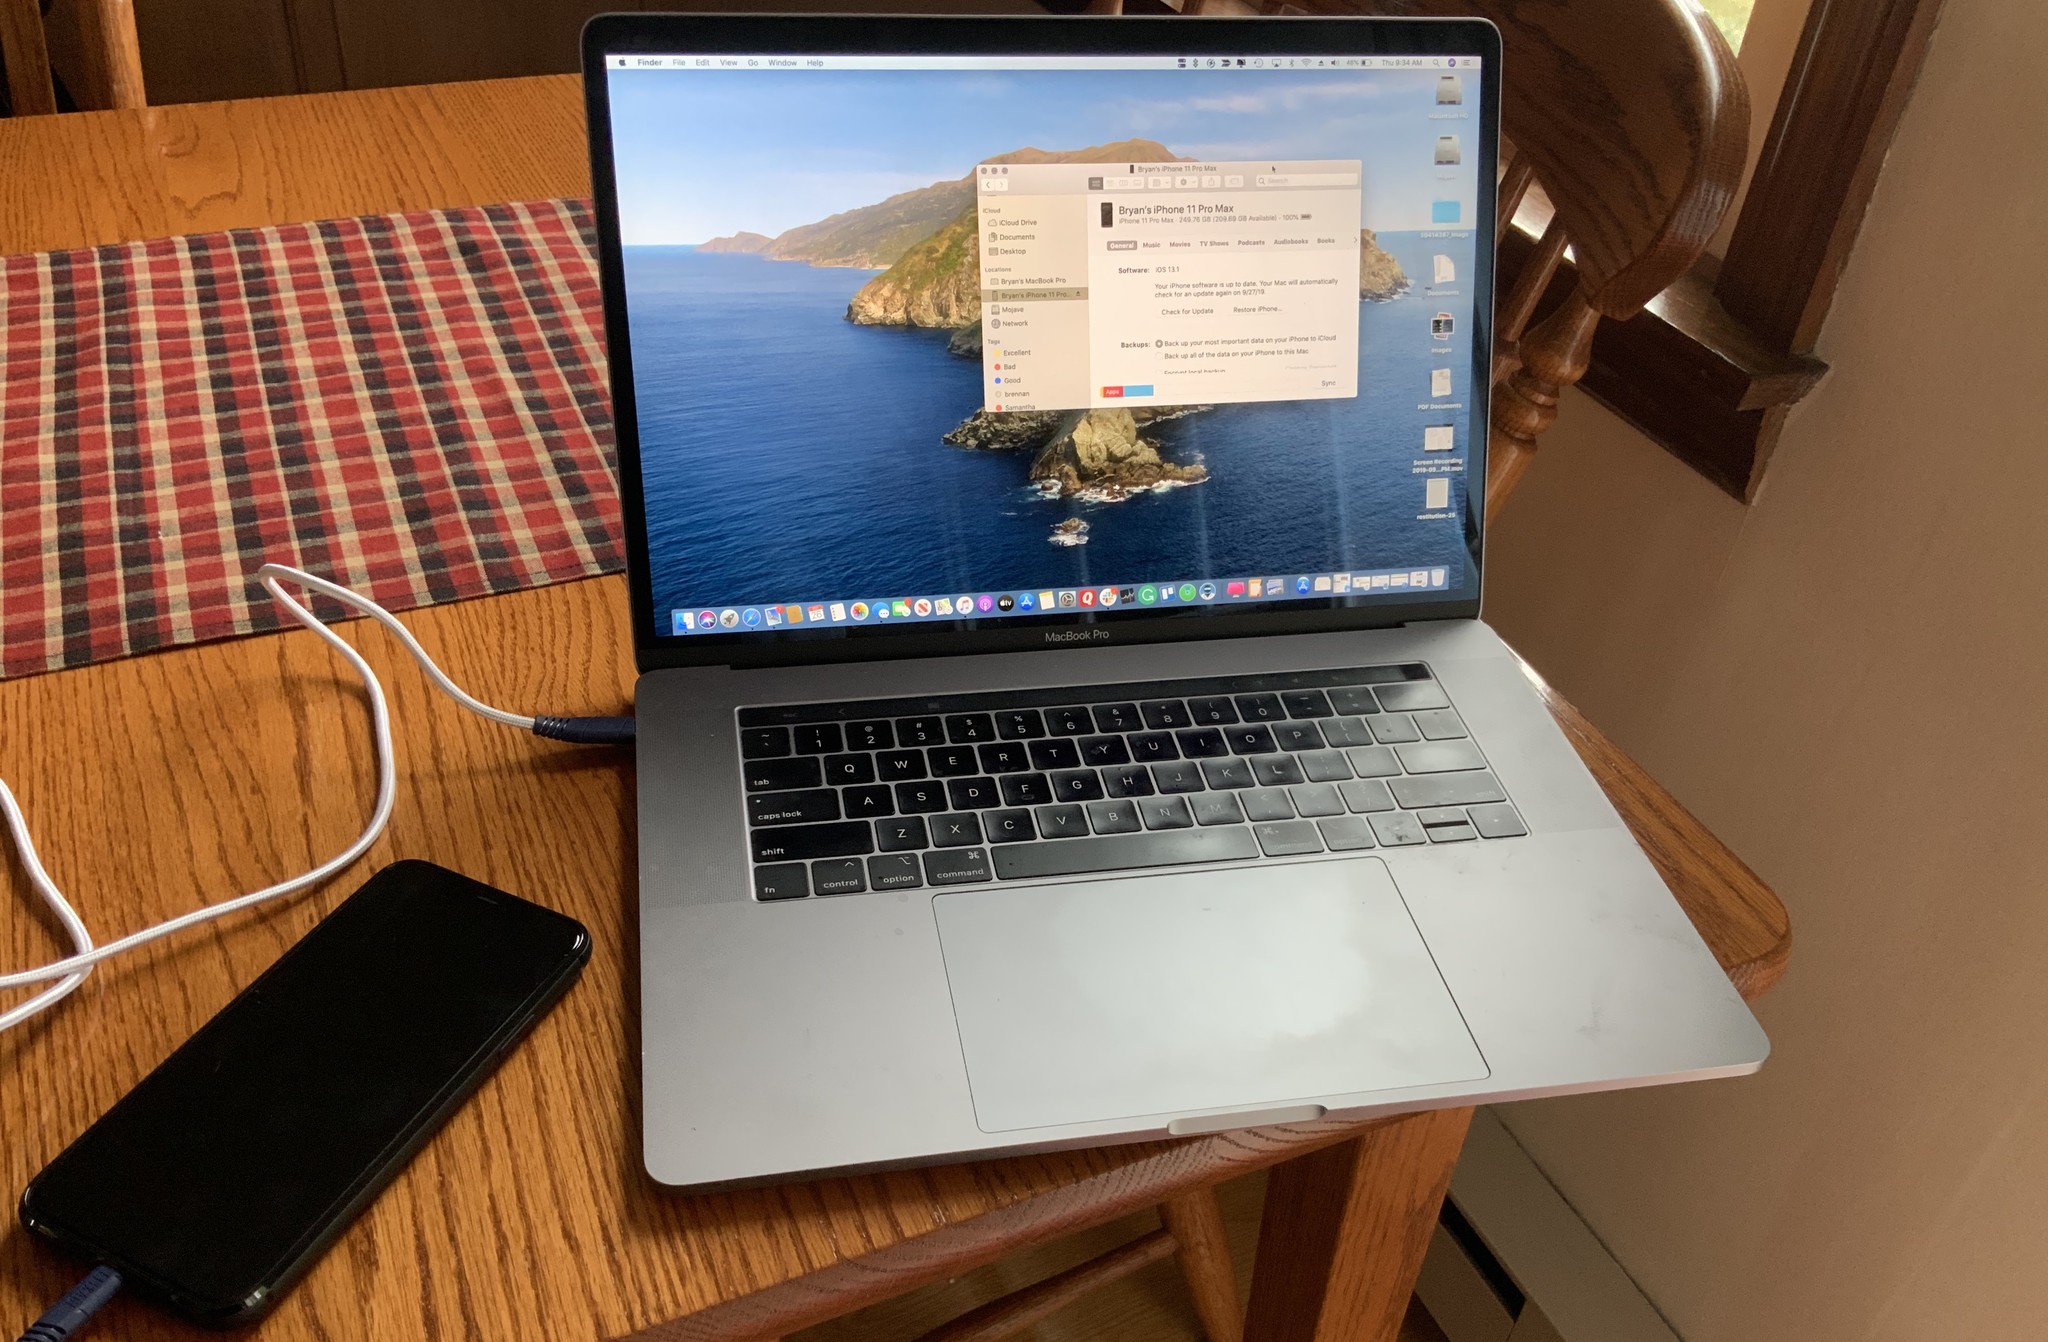 syncing iPhone on macOS Catalina